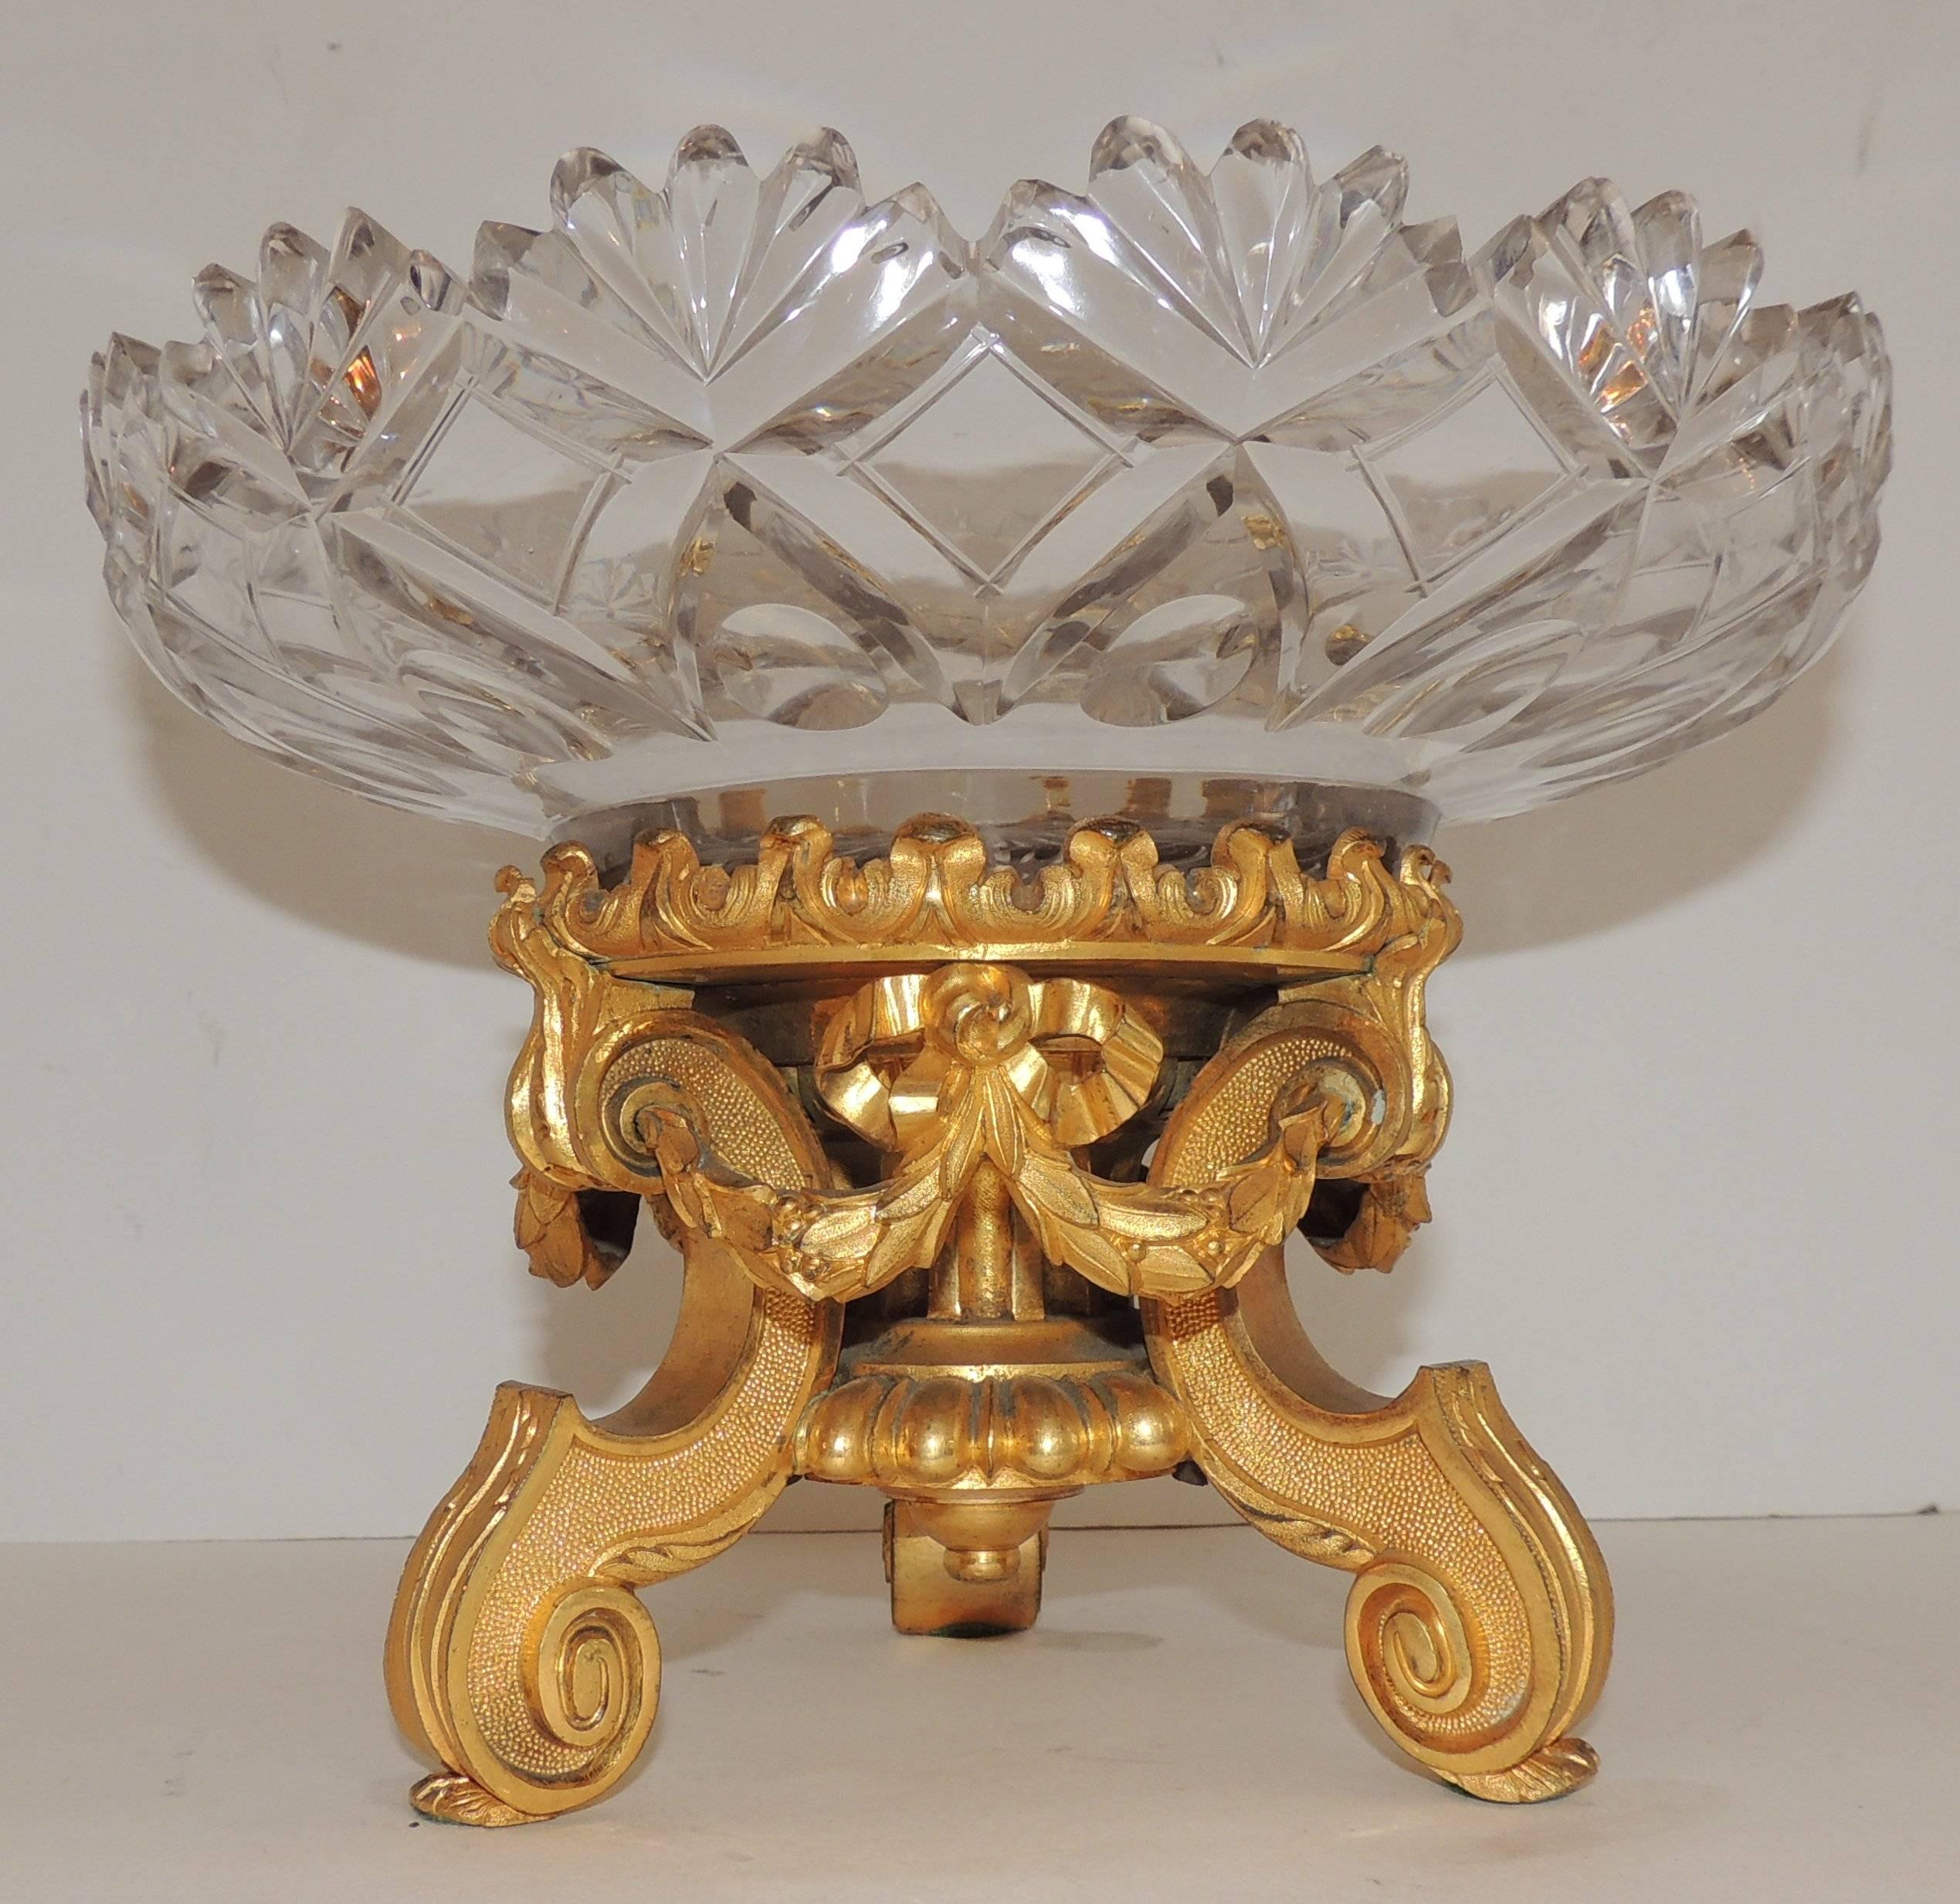 Wonderful French Dore bronze and cut crystal round centerpiece gilt bows and swags finish off the base of this incredible cut crystal bowl.